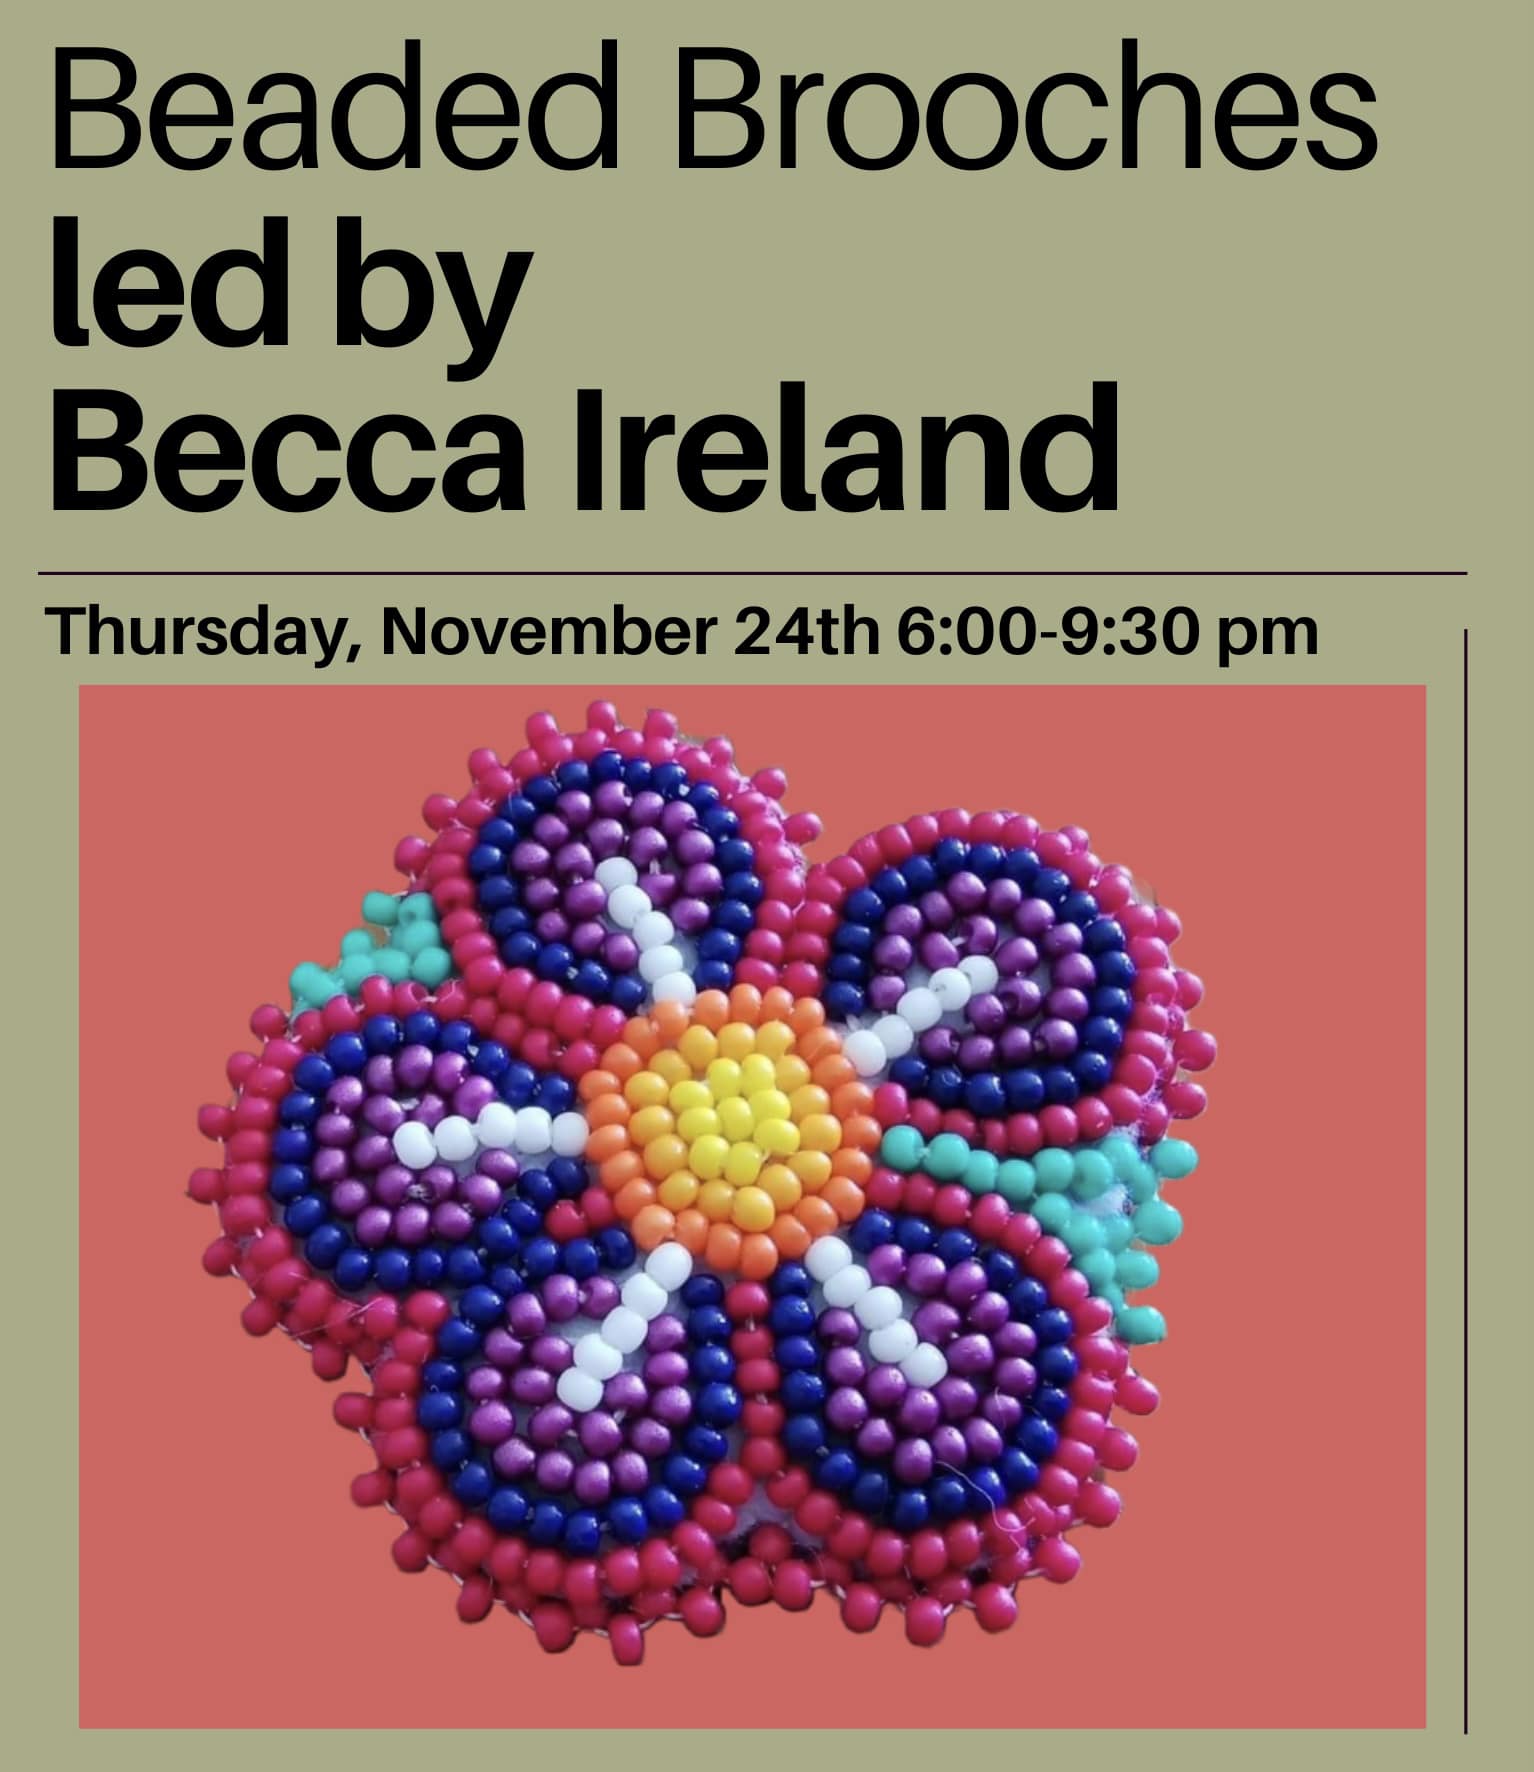 Image of a beaded flower. Text reads: Beaded Brooches by Becca Ireland, Thursday, November 24th, 6pm - 9:30pm